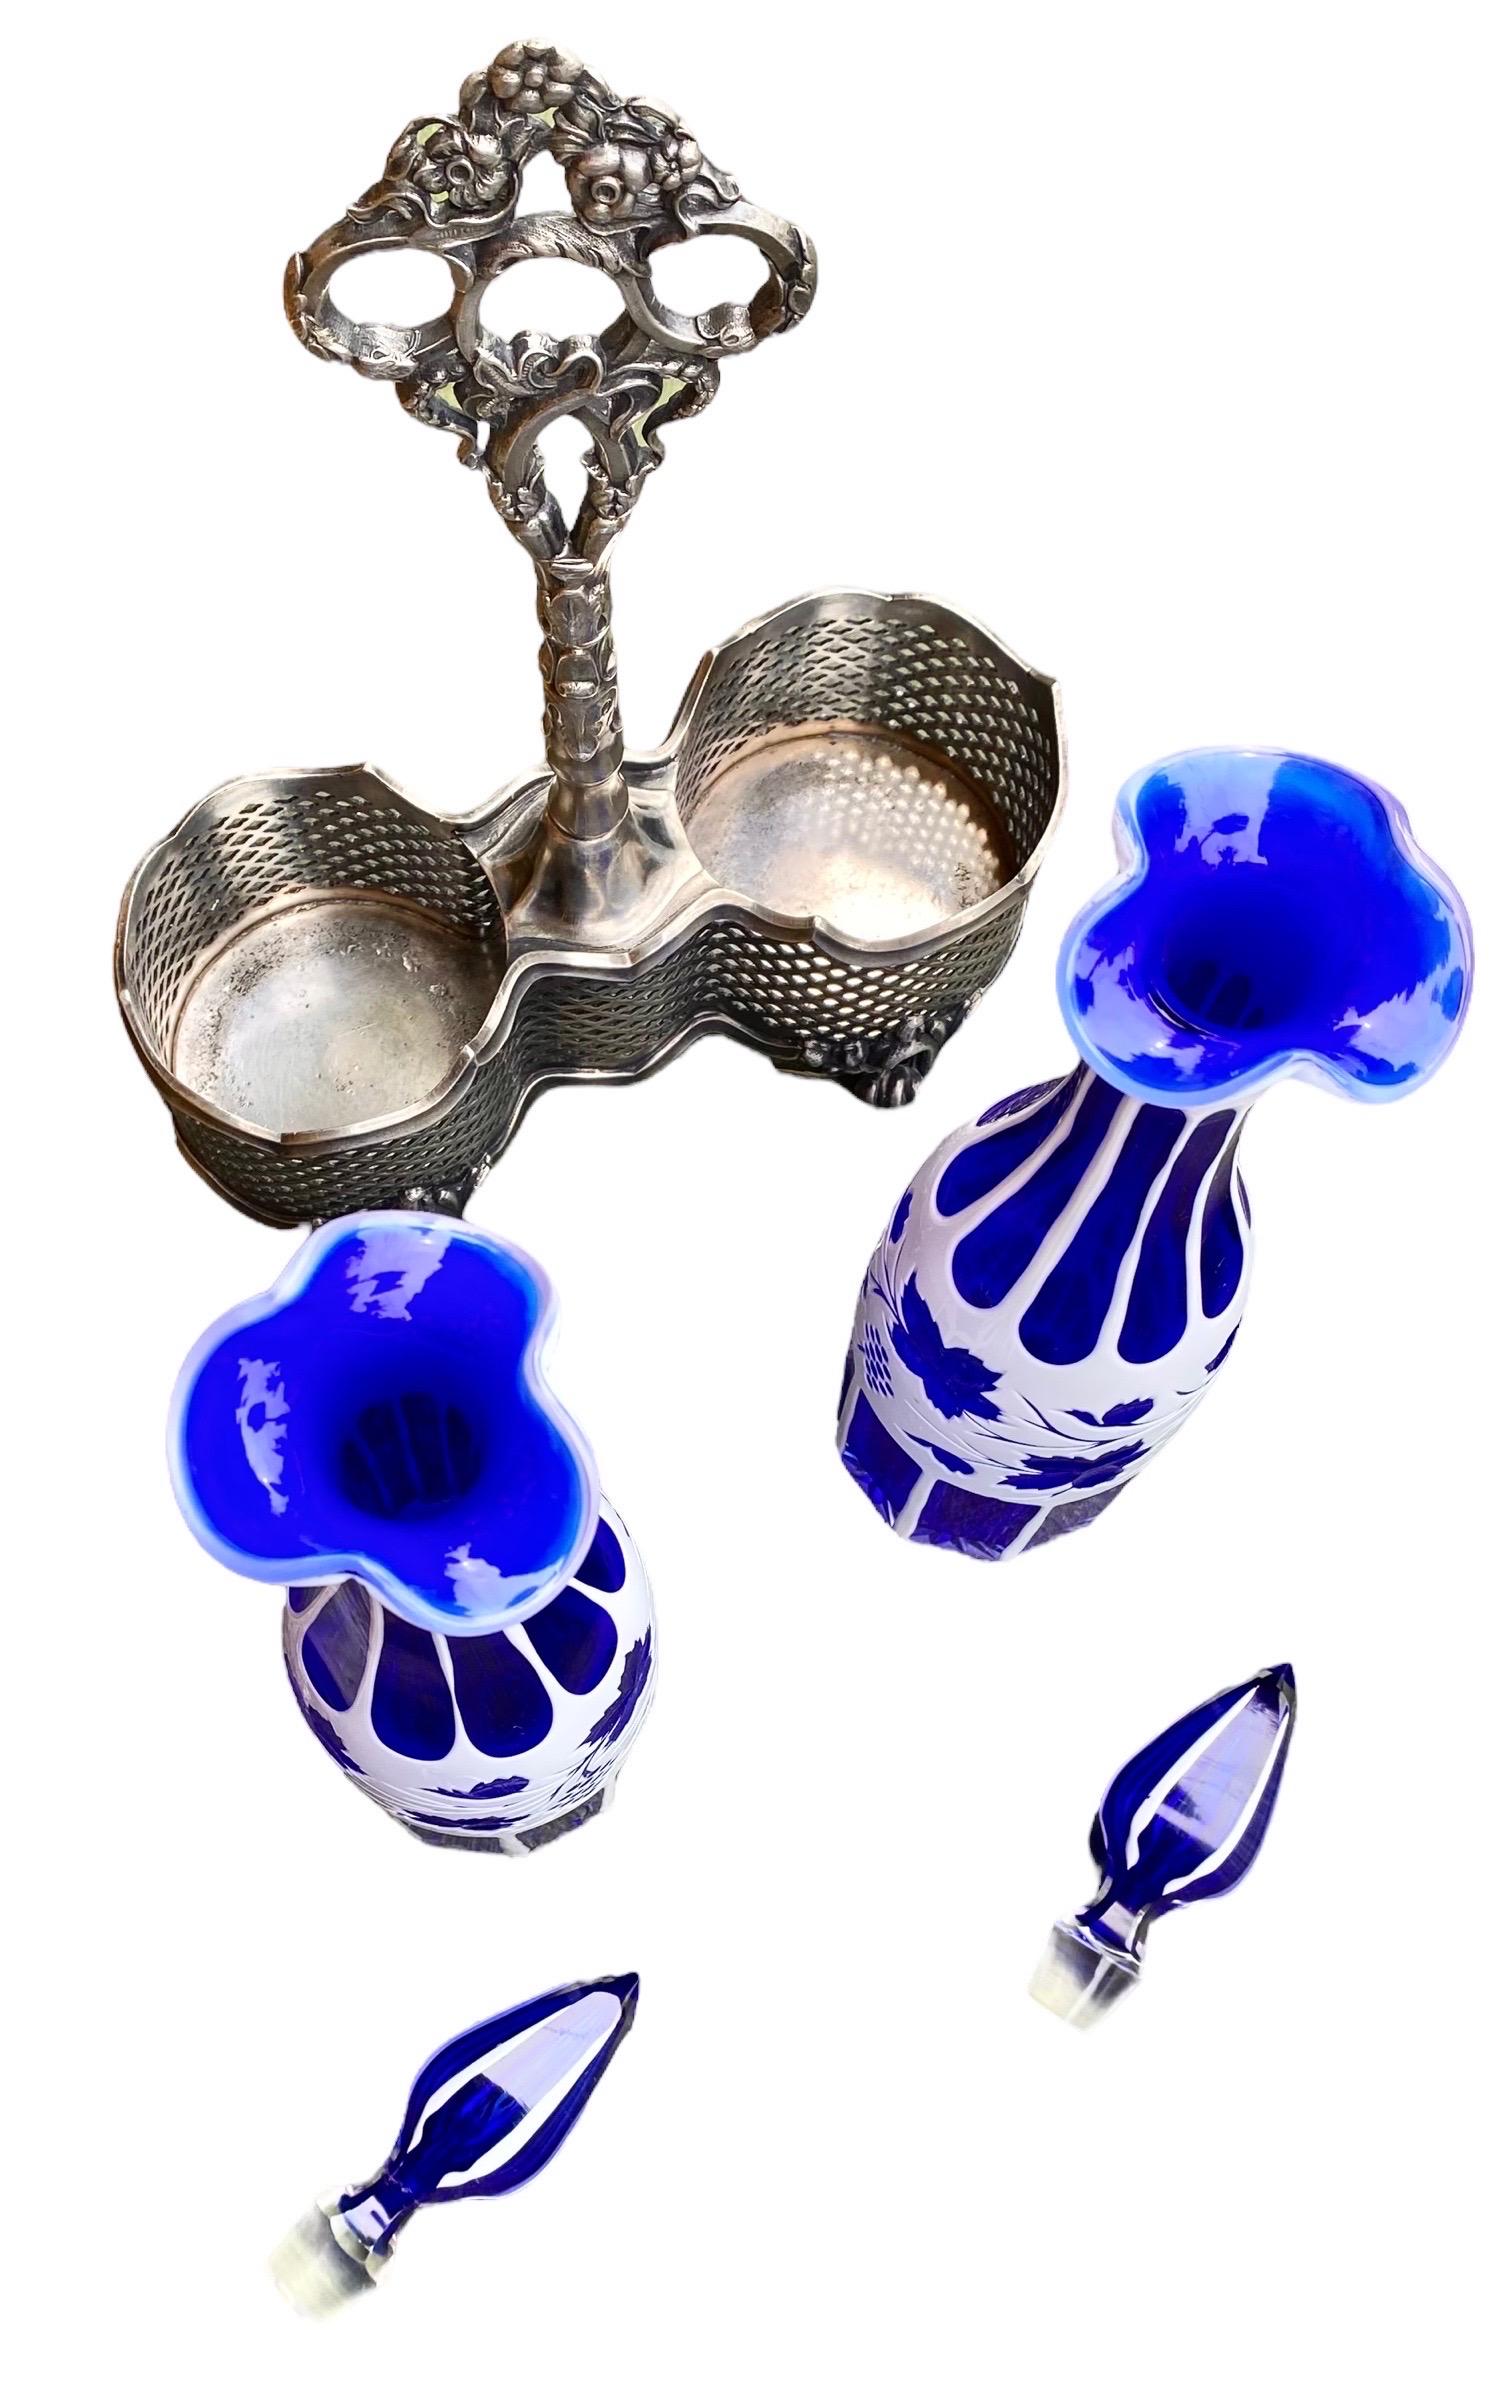 Hand-Crafted Pair of Bohemian Glass White over Blue Decanters in Britannia Metal Holder